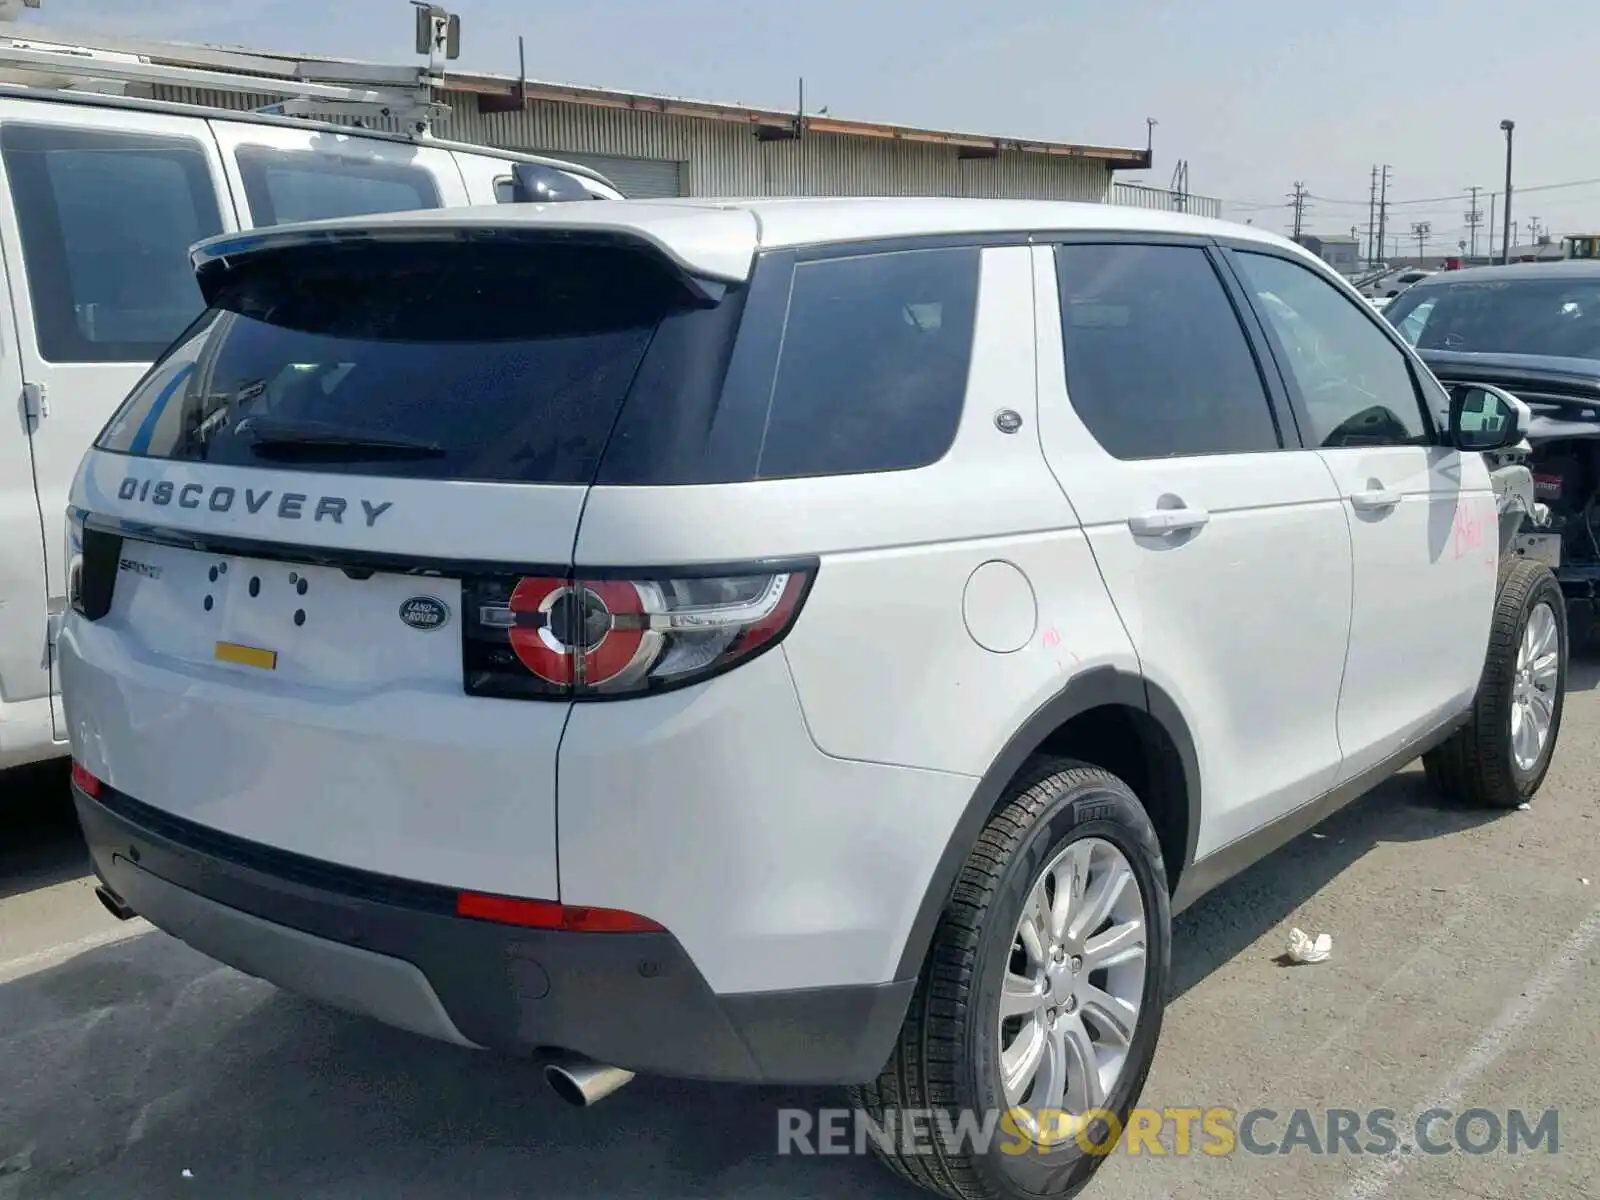 4 Photograph of a damaged car SALCP2FXXKH784077 LAND ROVER DISCOVERY 2019